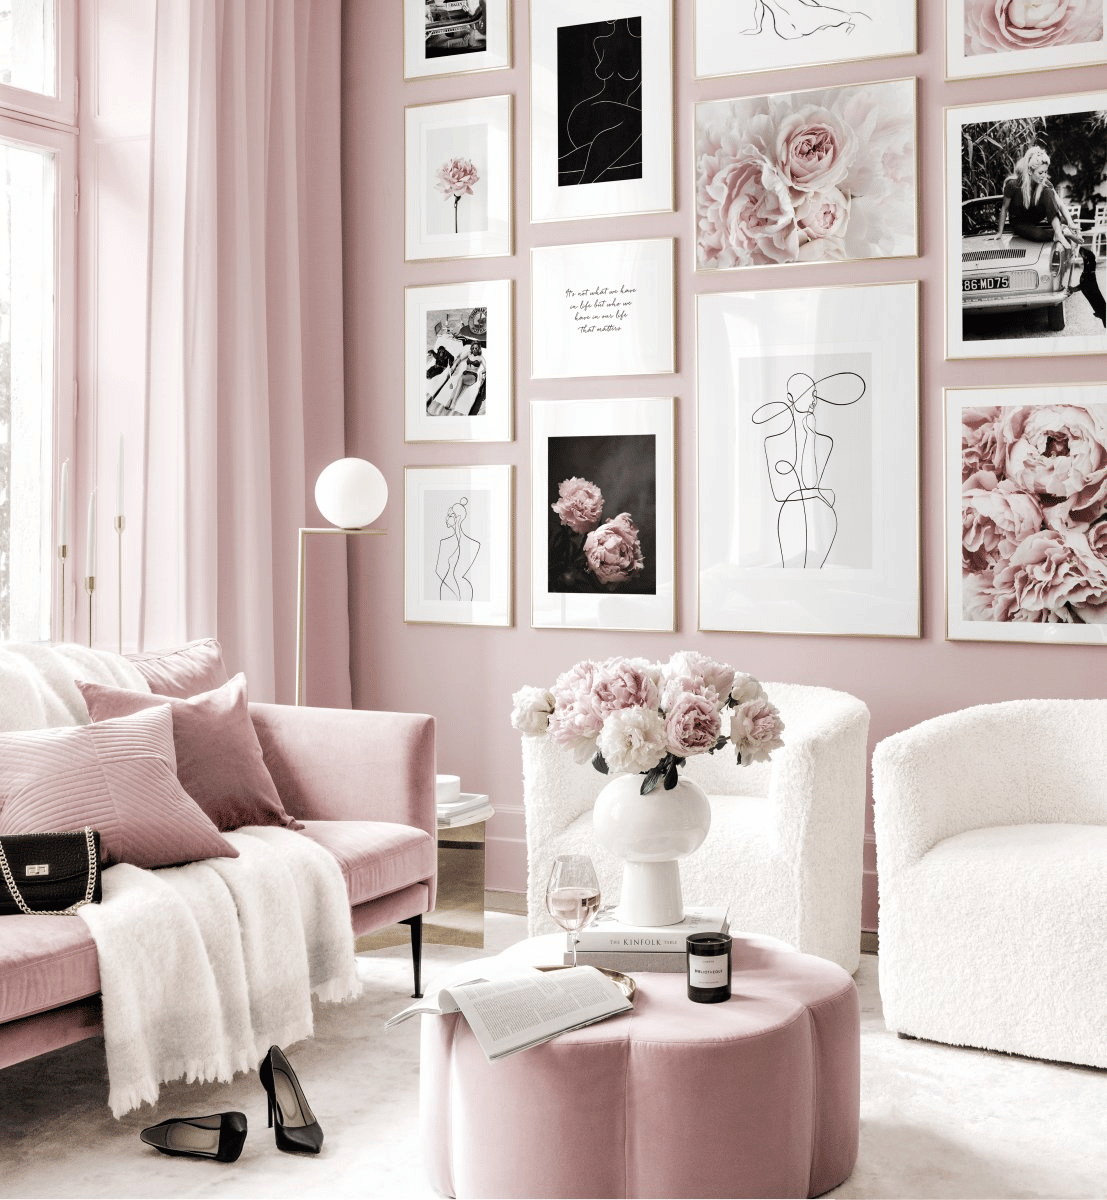 Alluring use of pink, white, and black decors in living spaces